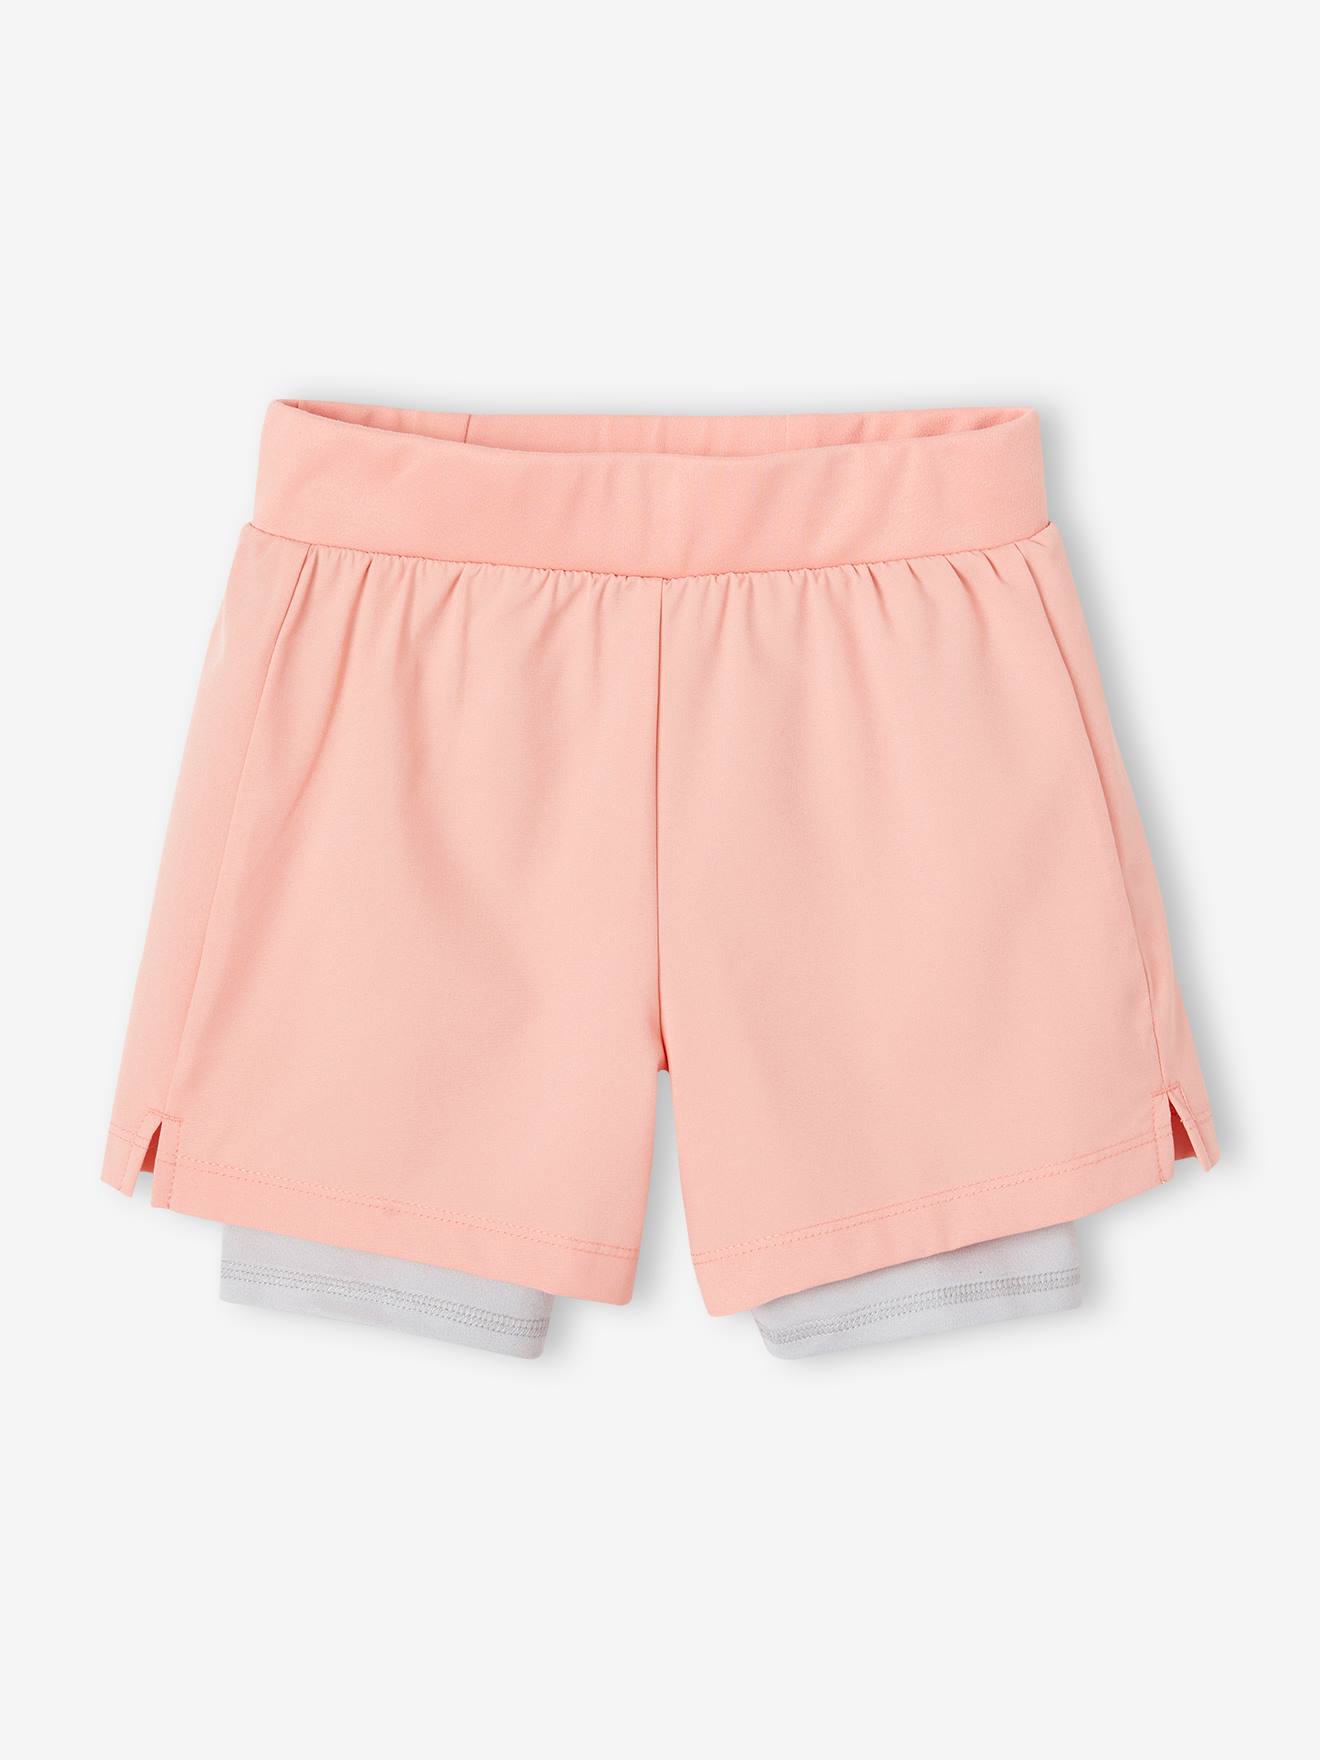 2-in-1 Sports Shorts in Techno Fabric, for Girls coral